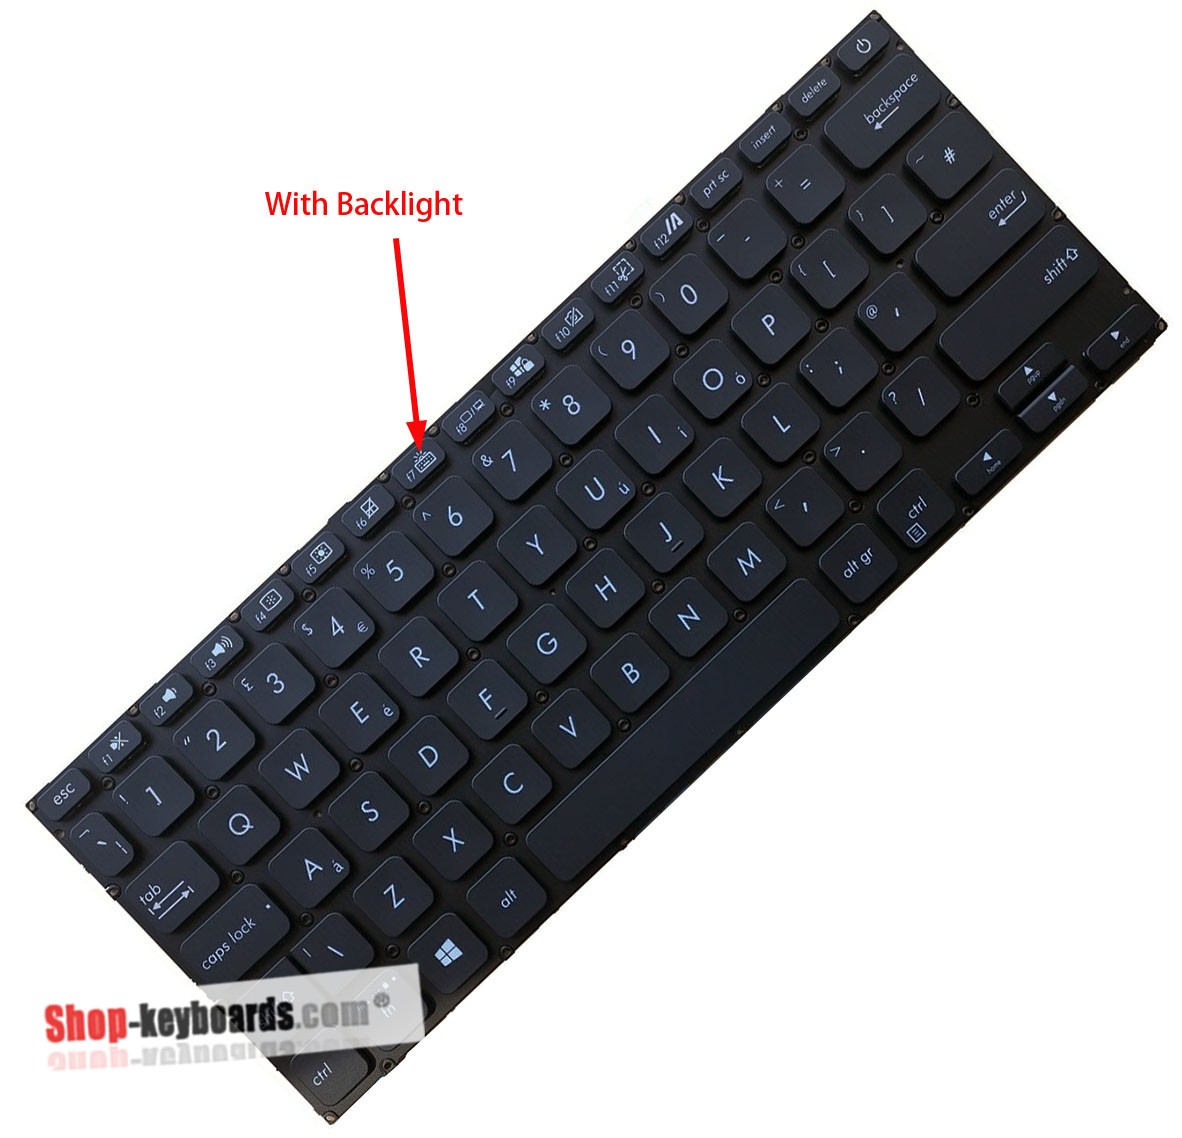 Asus 0KNB0-3108US00 Keyboard replacement